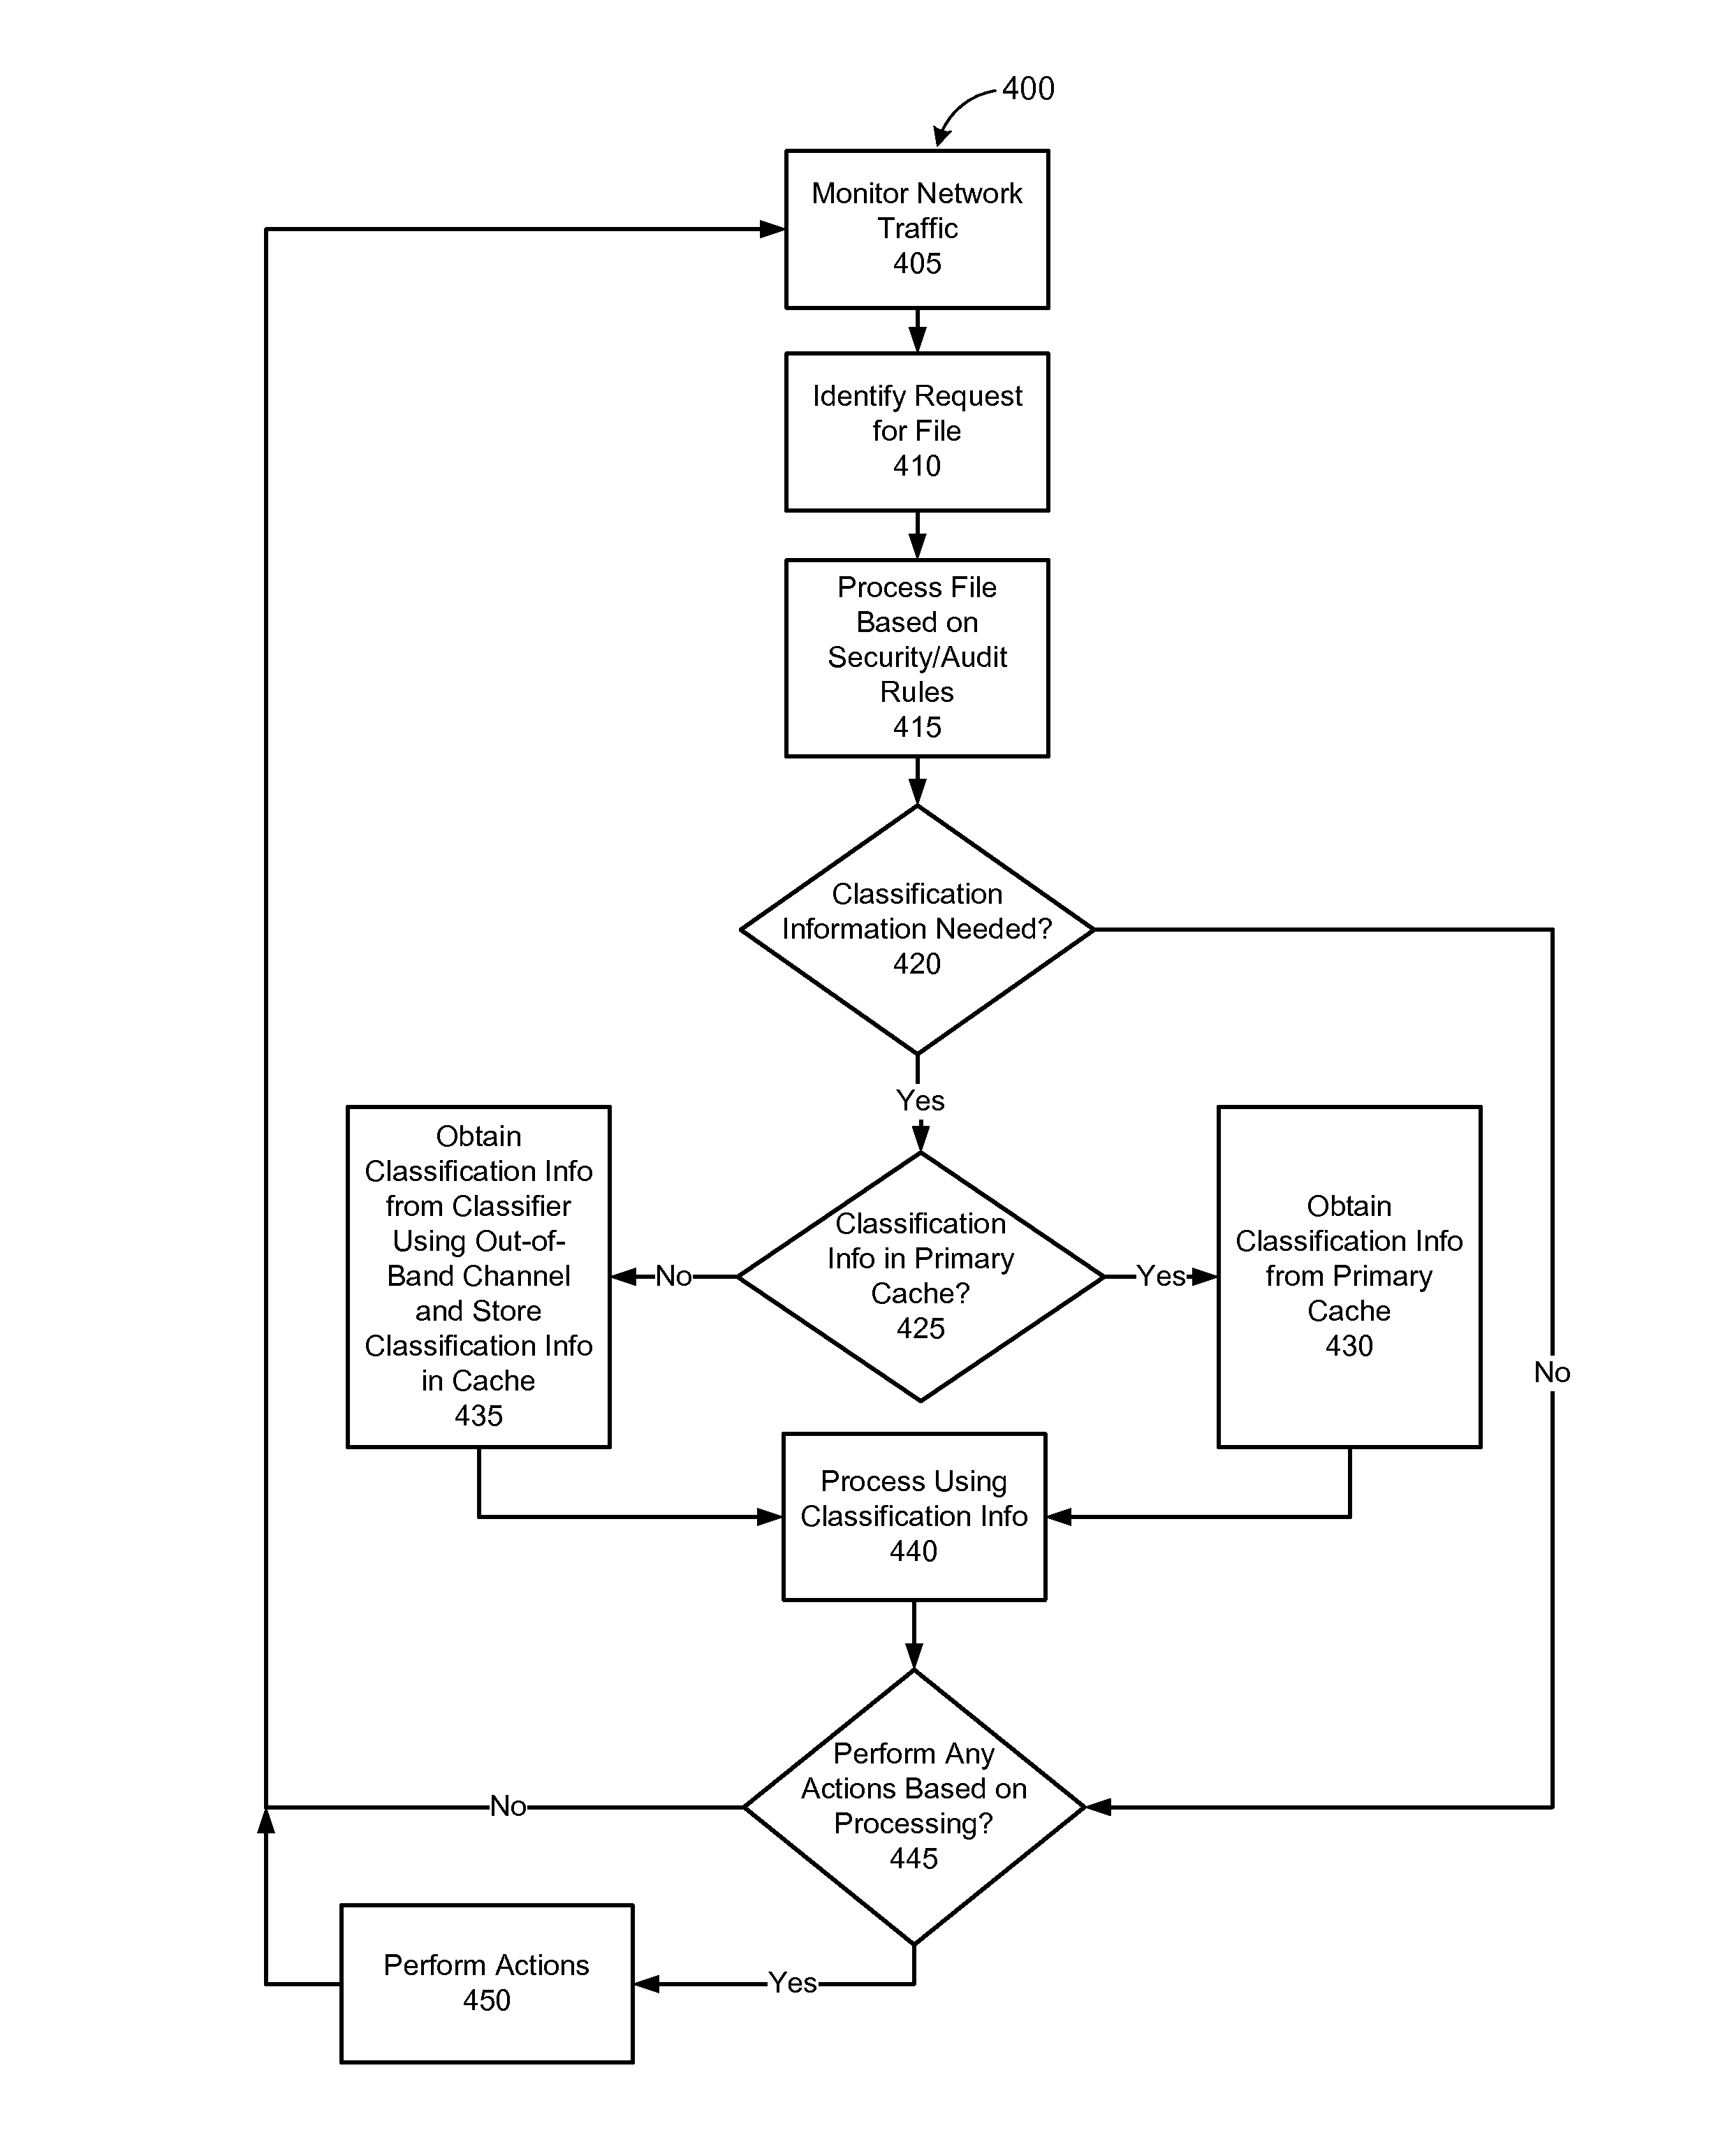 On-demand content classification using an out-of-band communications channel for facilitating file activity monitoring and control